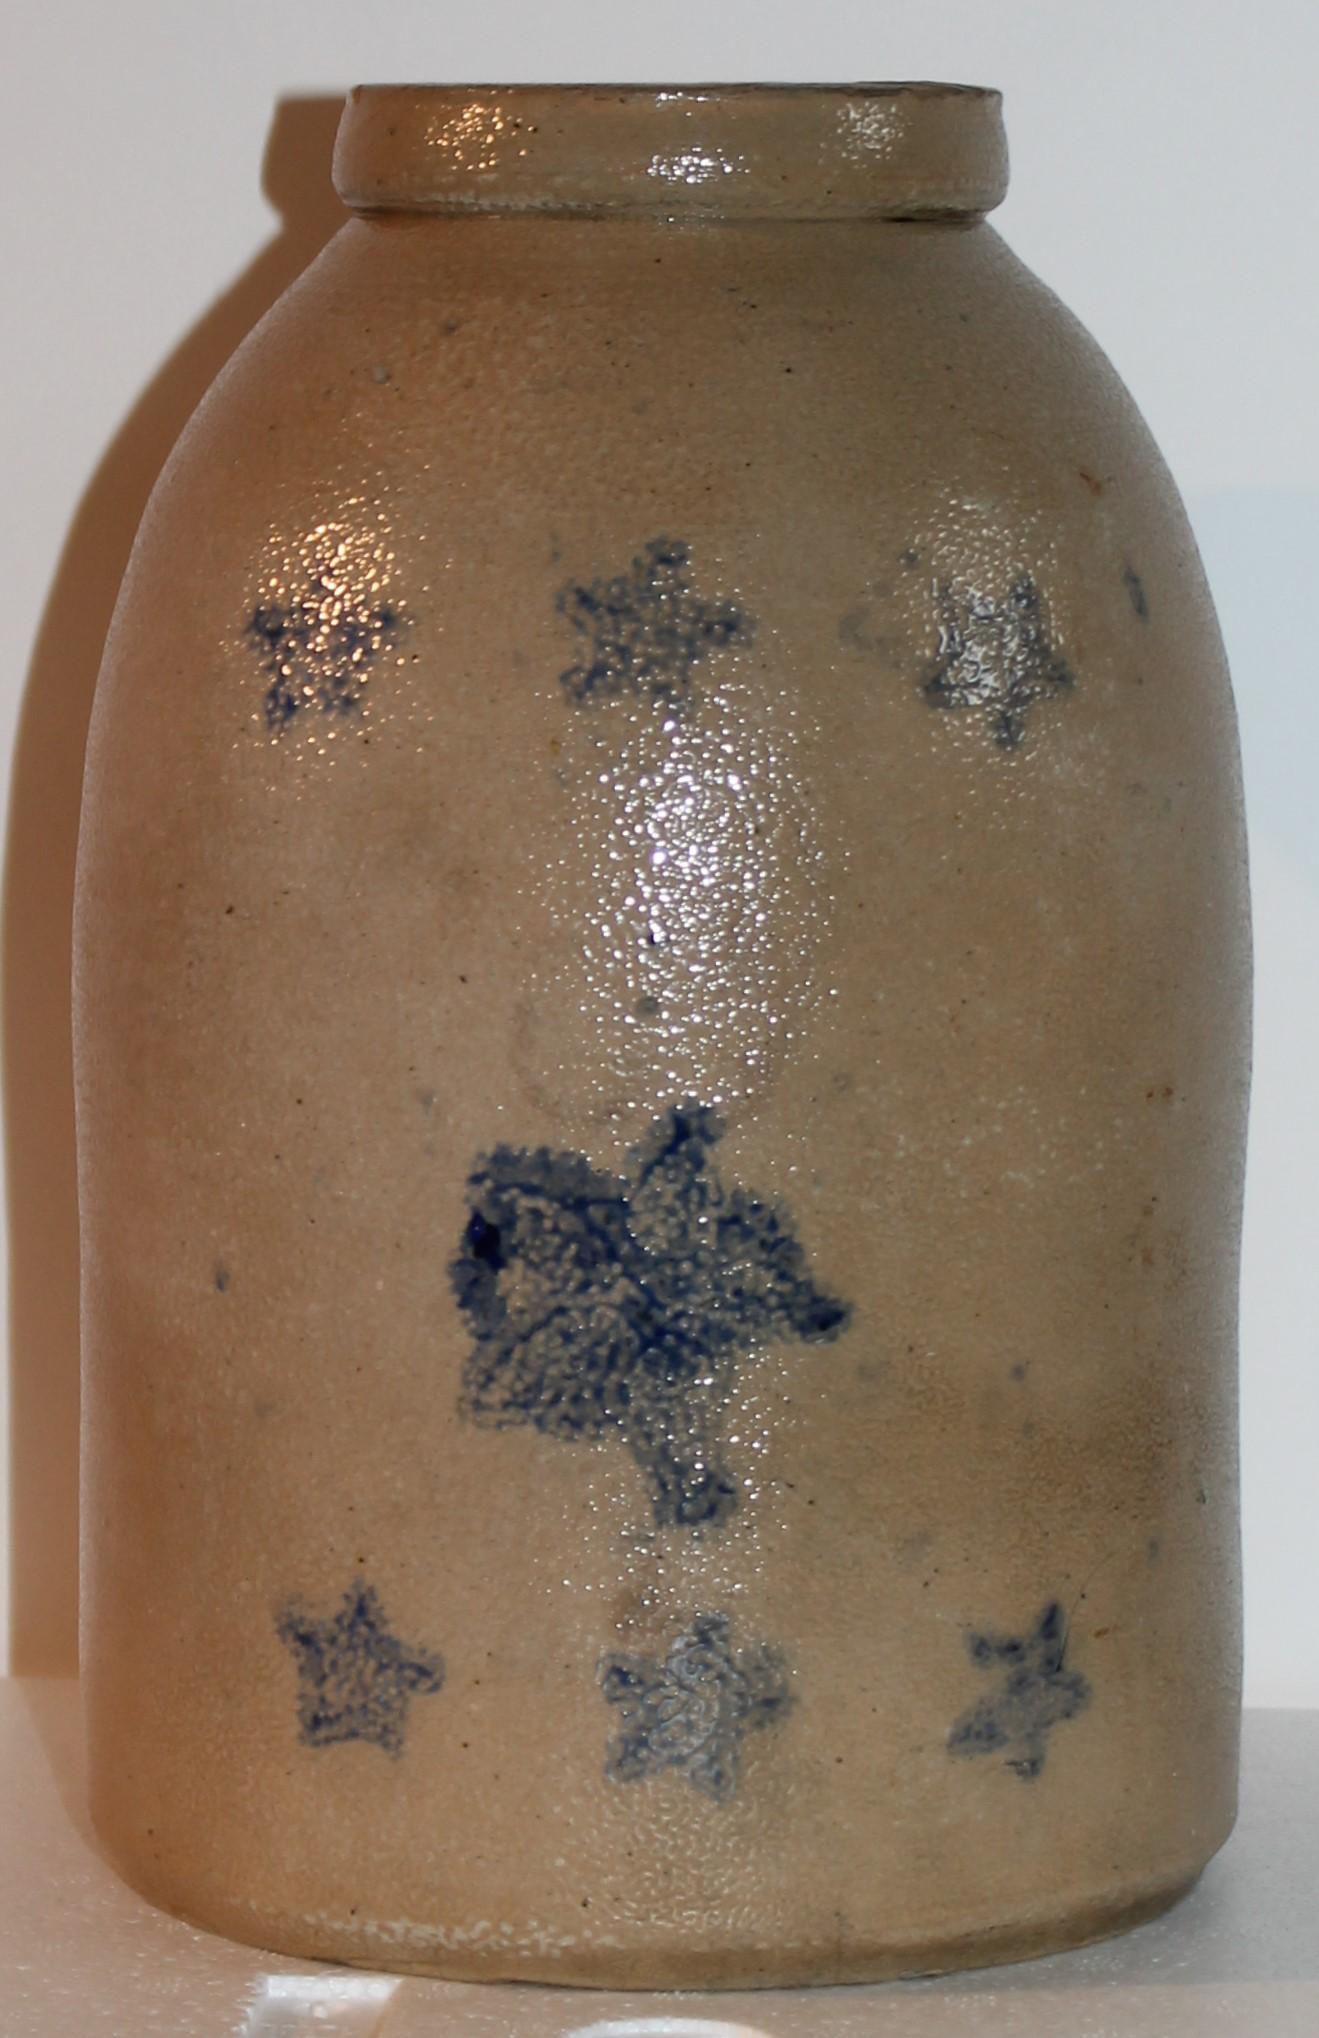 This fine salt glazed stoneware jar or storage jar has blue floating stars all over the face of the crock. It is in fine condition with no cracks a few minor chips around the inside rim. This is a fantastic folk art stoneware crock. Let’s call it